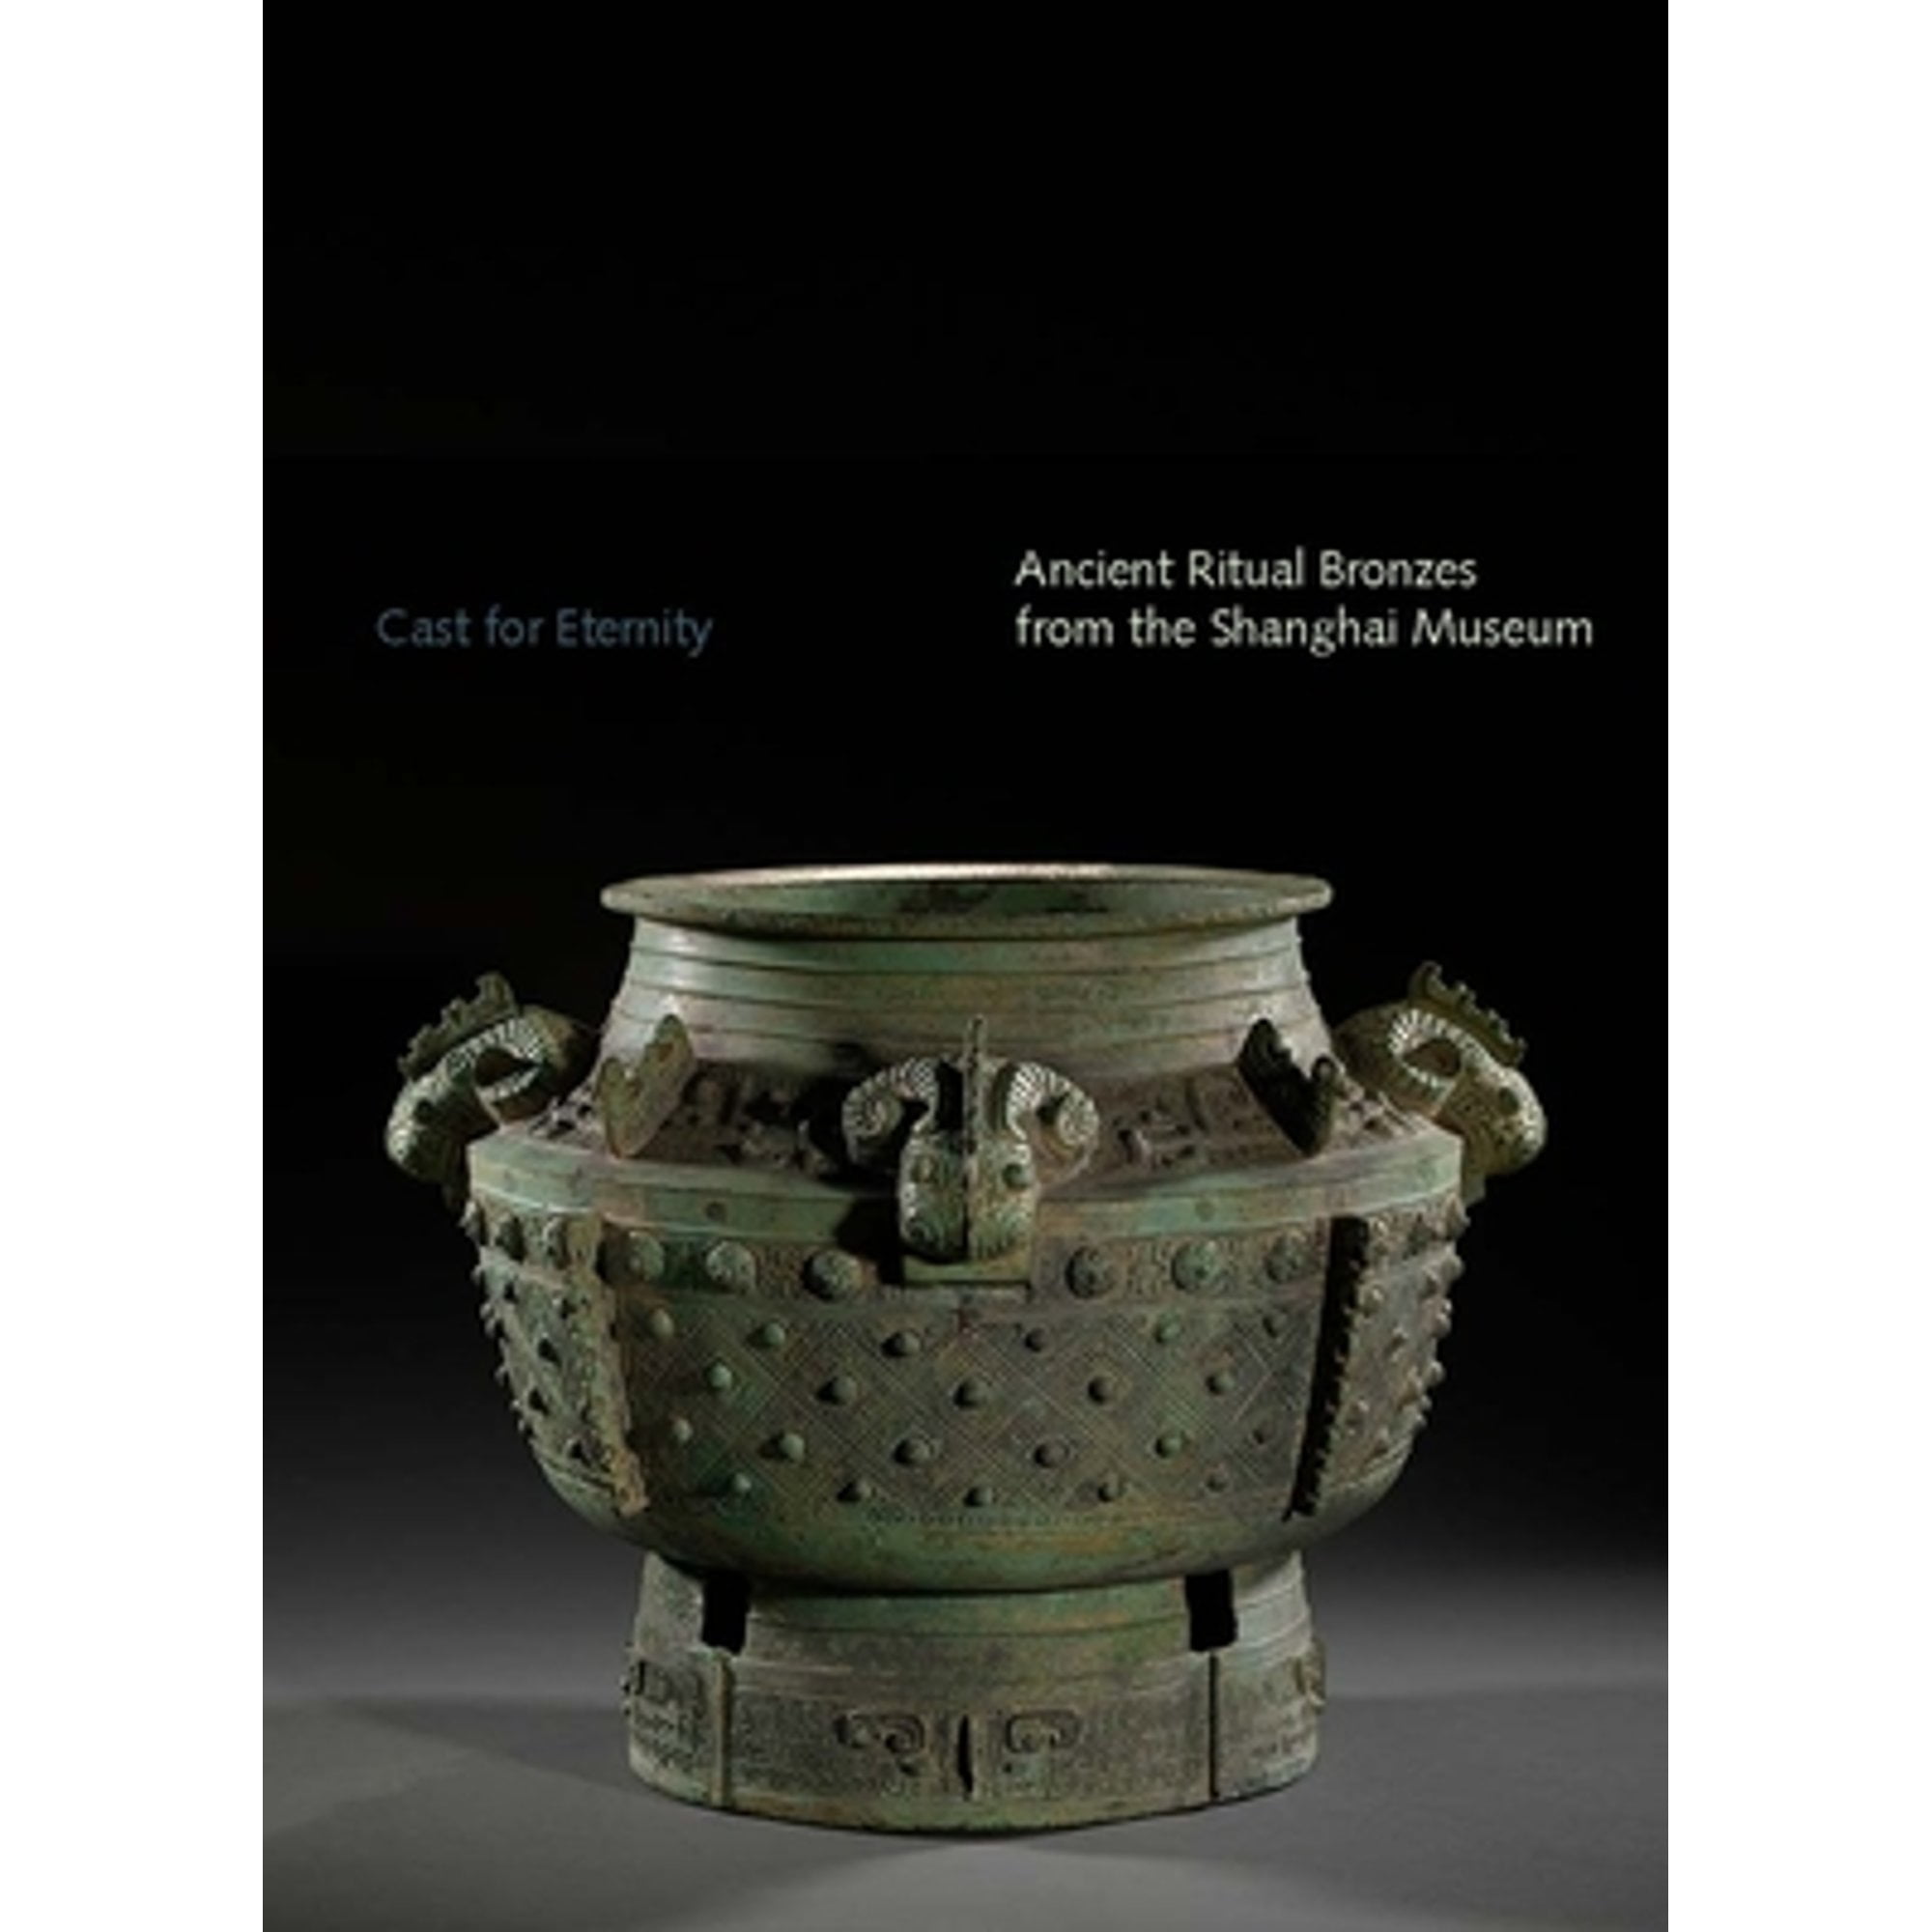 Pre-Owned Cast for Eternity: Ancient Ritual Bronzes from the Shanghai Museum (Paperback 9780300207897) by Yang Liu, Ya Zhou